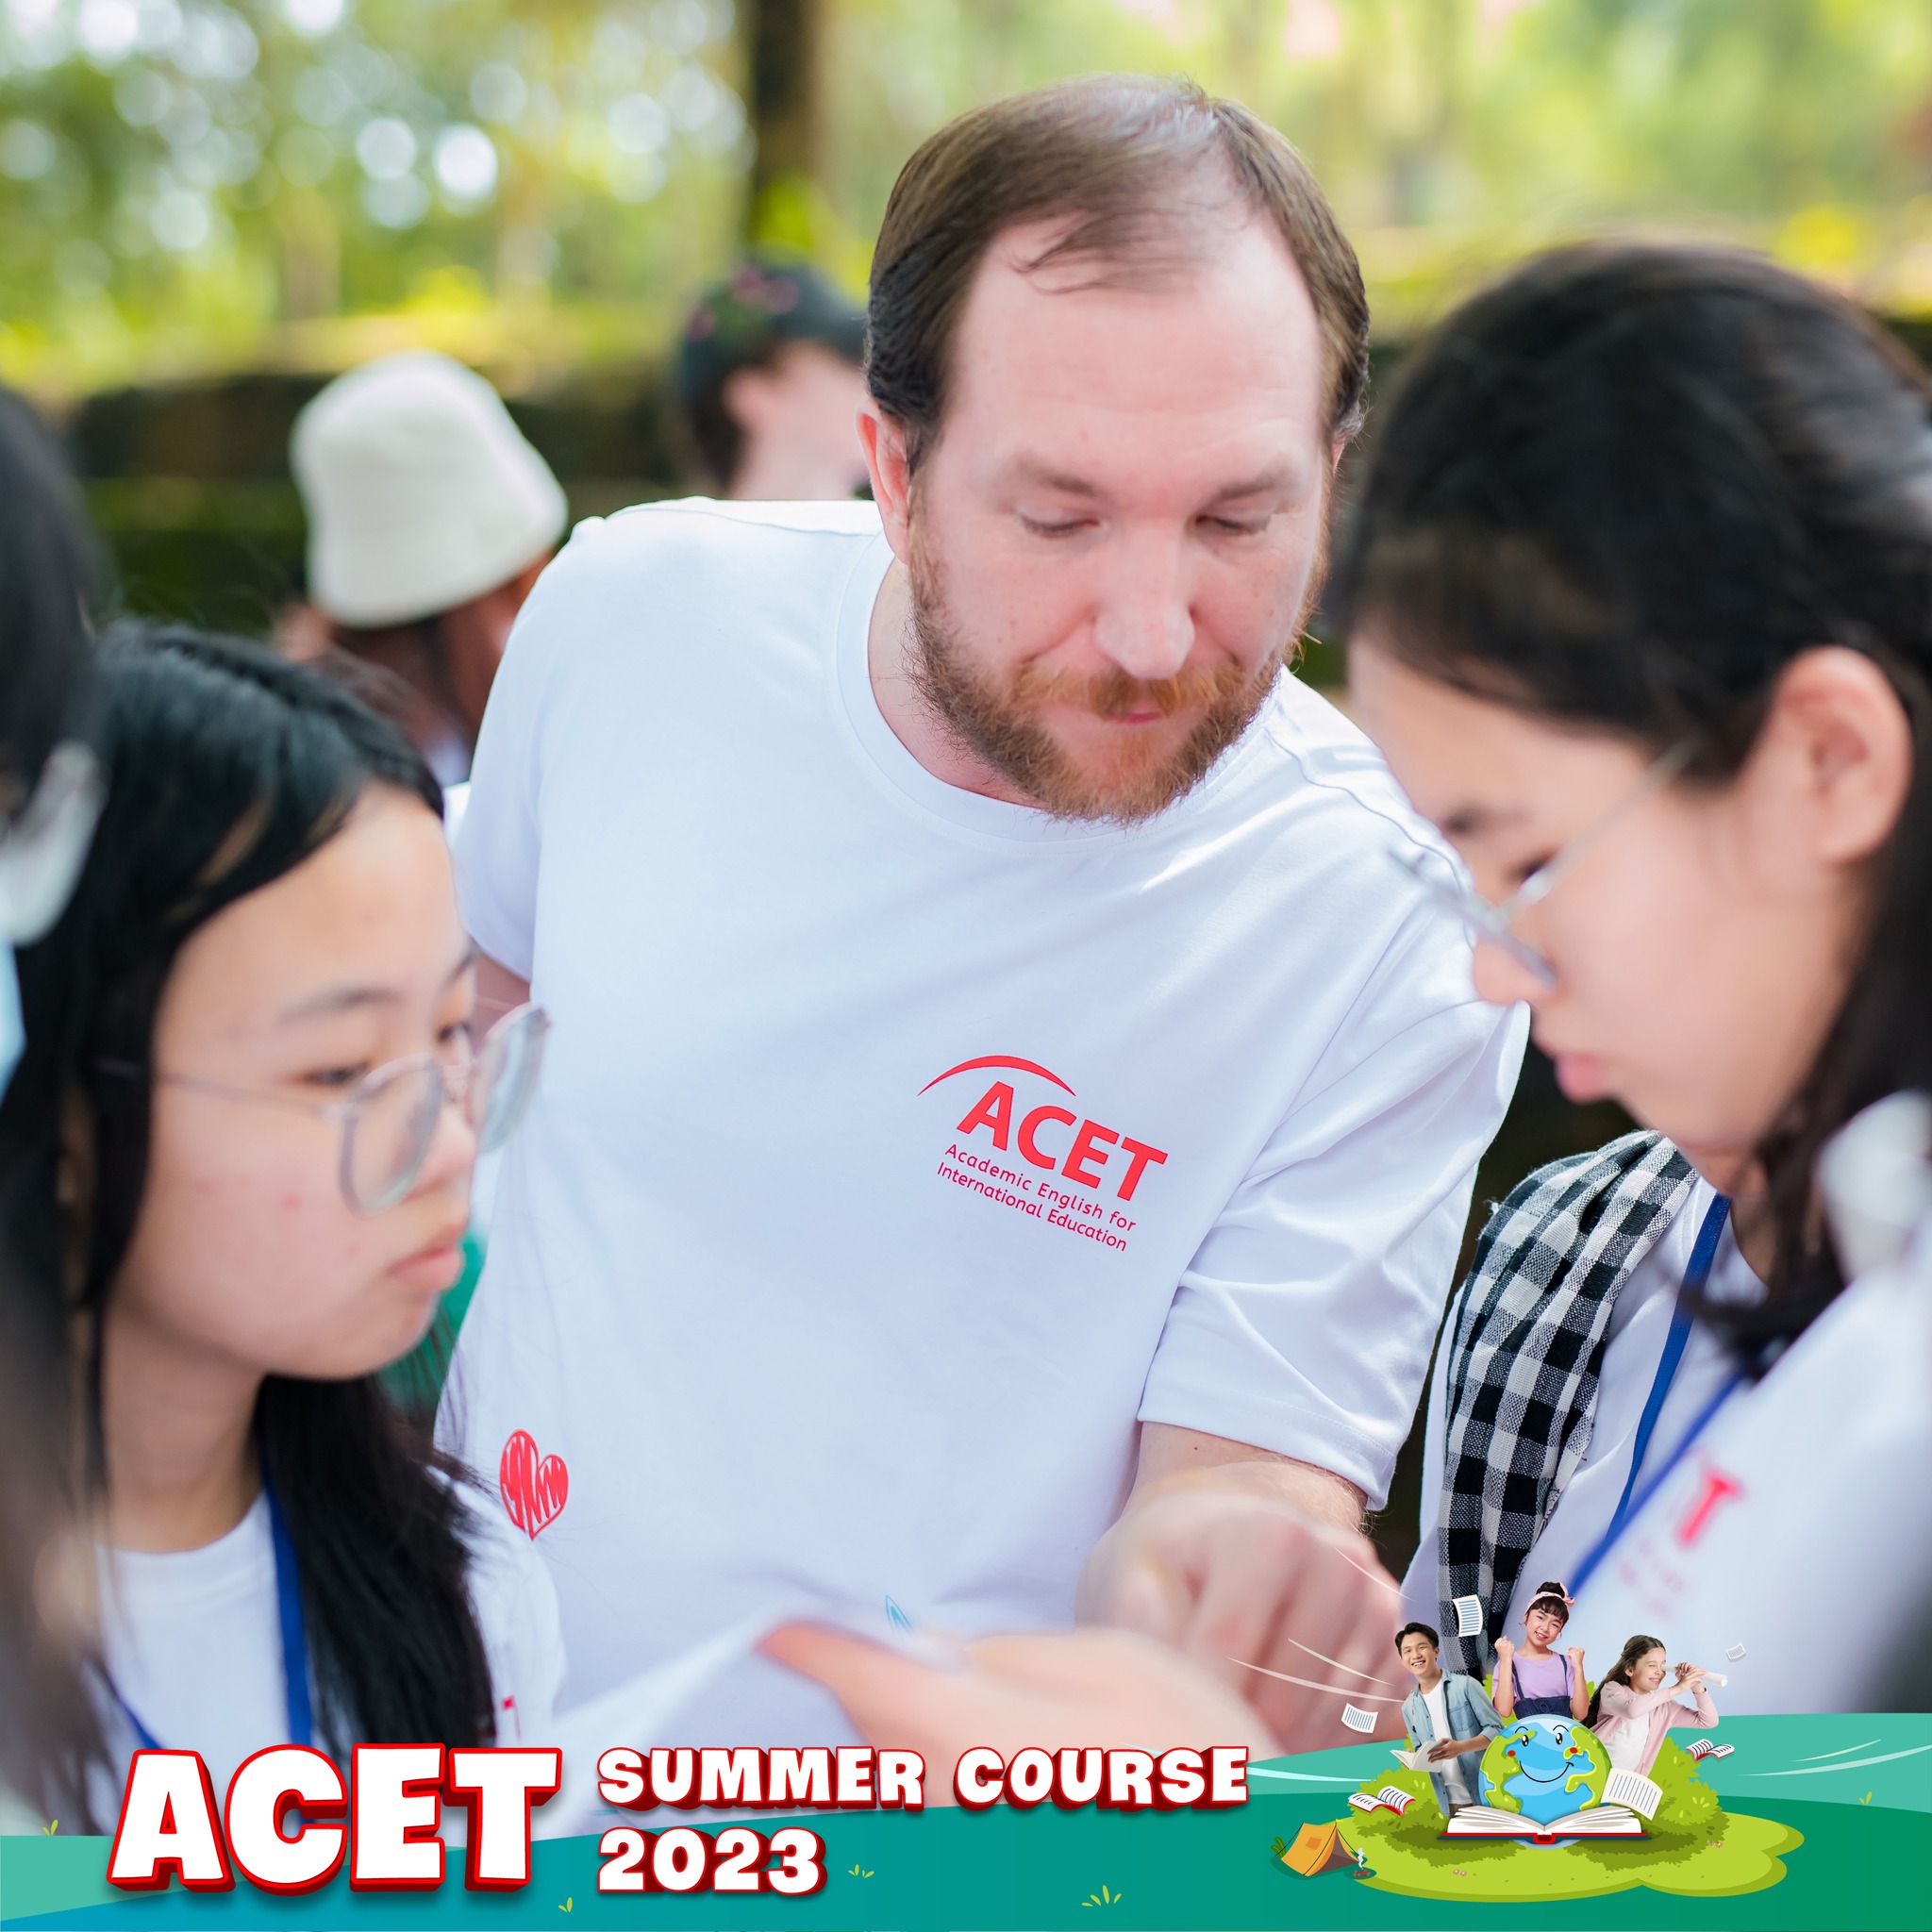 ACET - Australian Centre for Education and Training ảnh 1